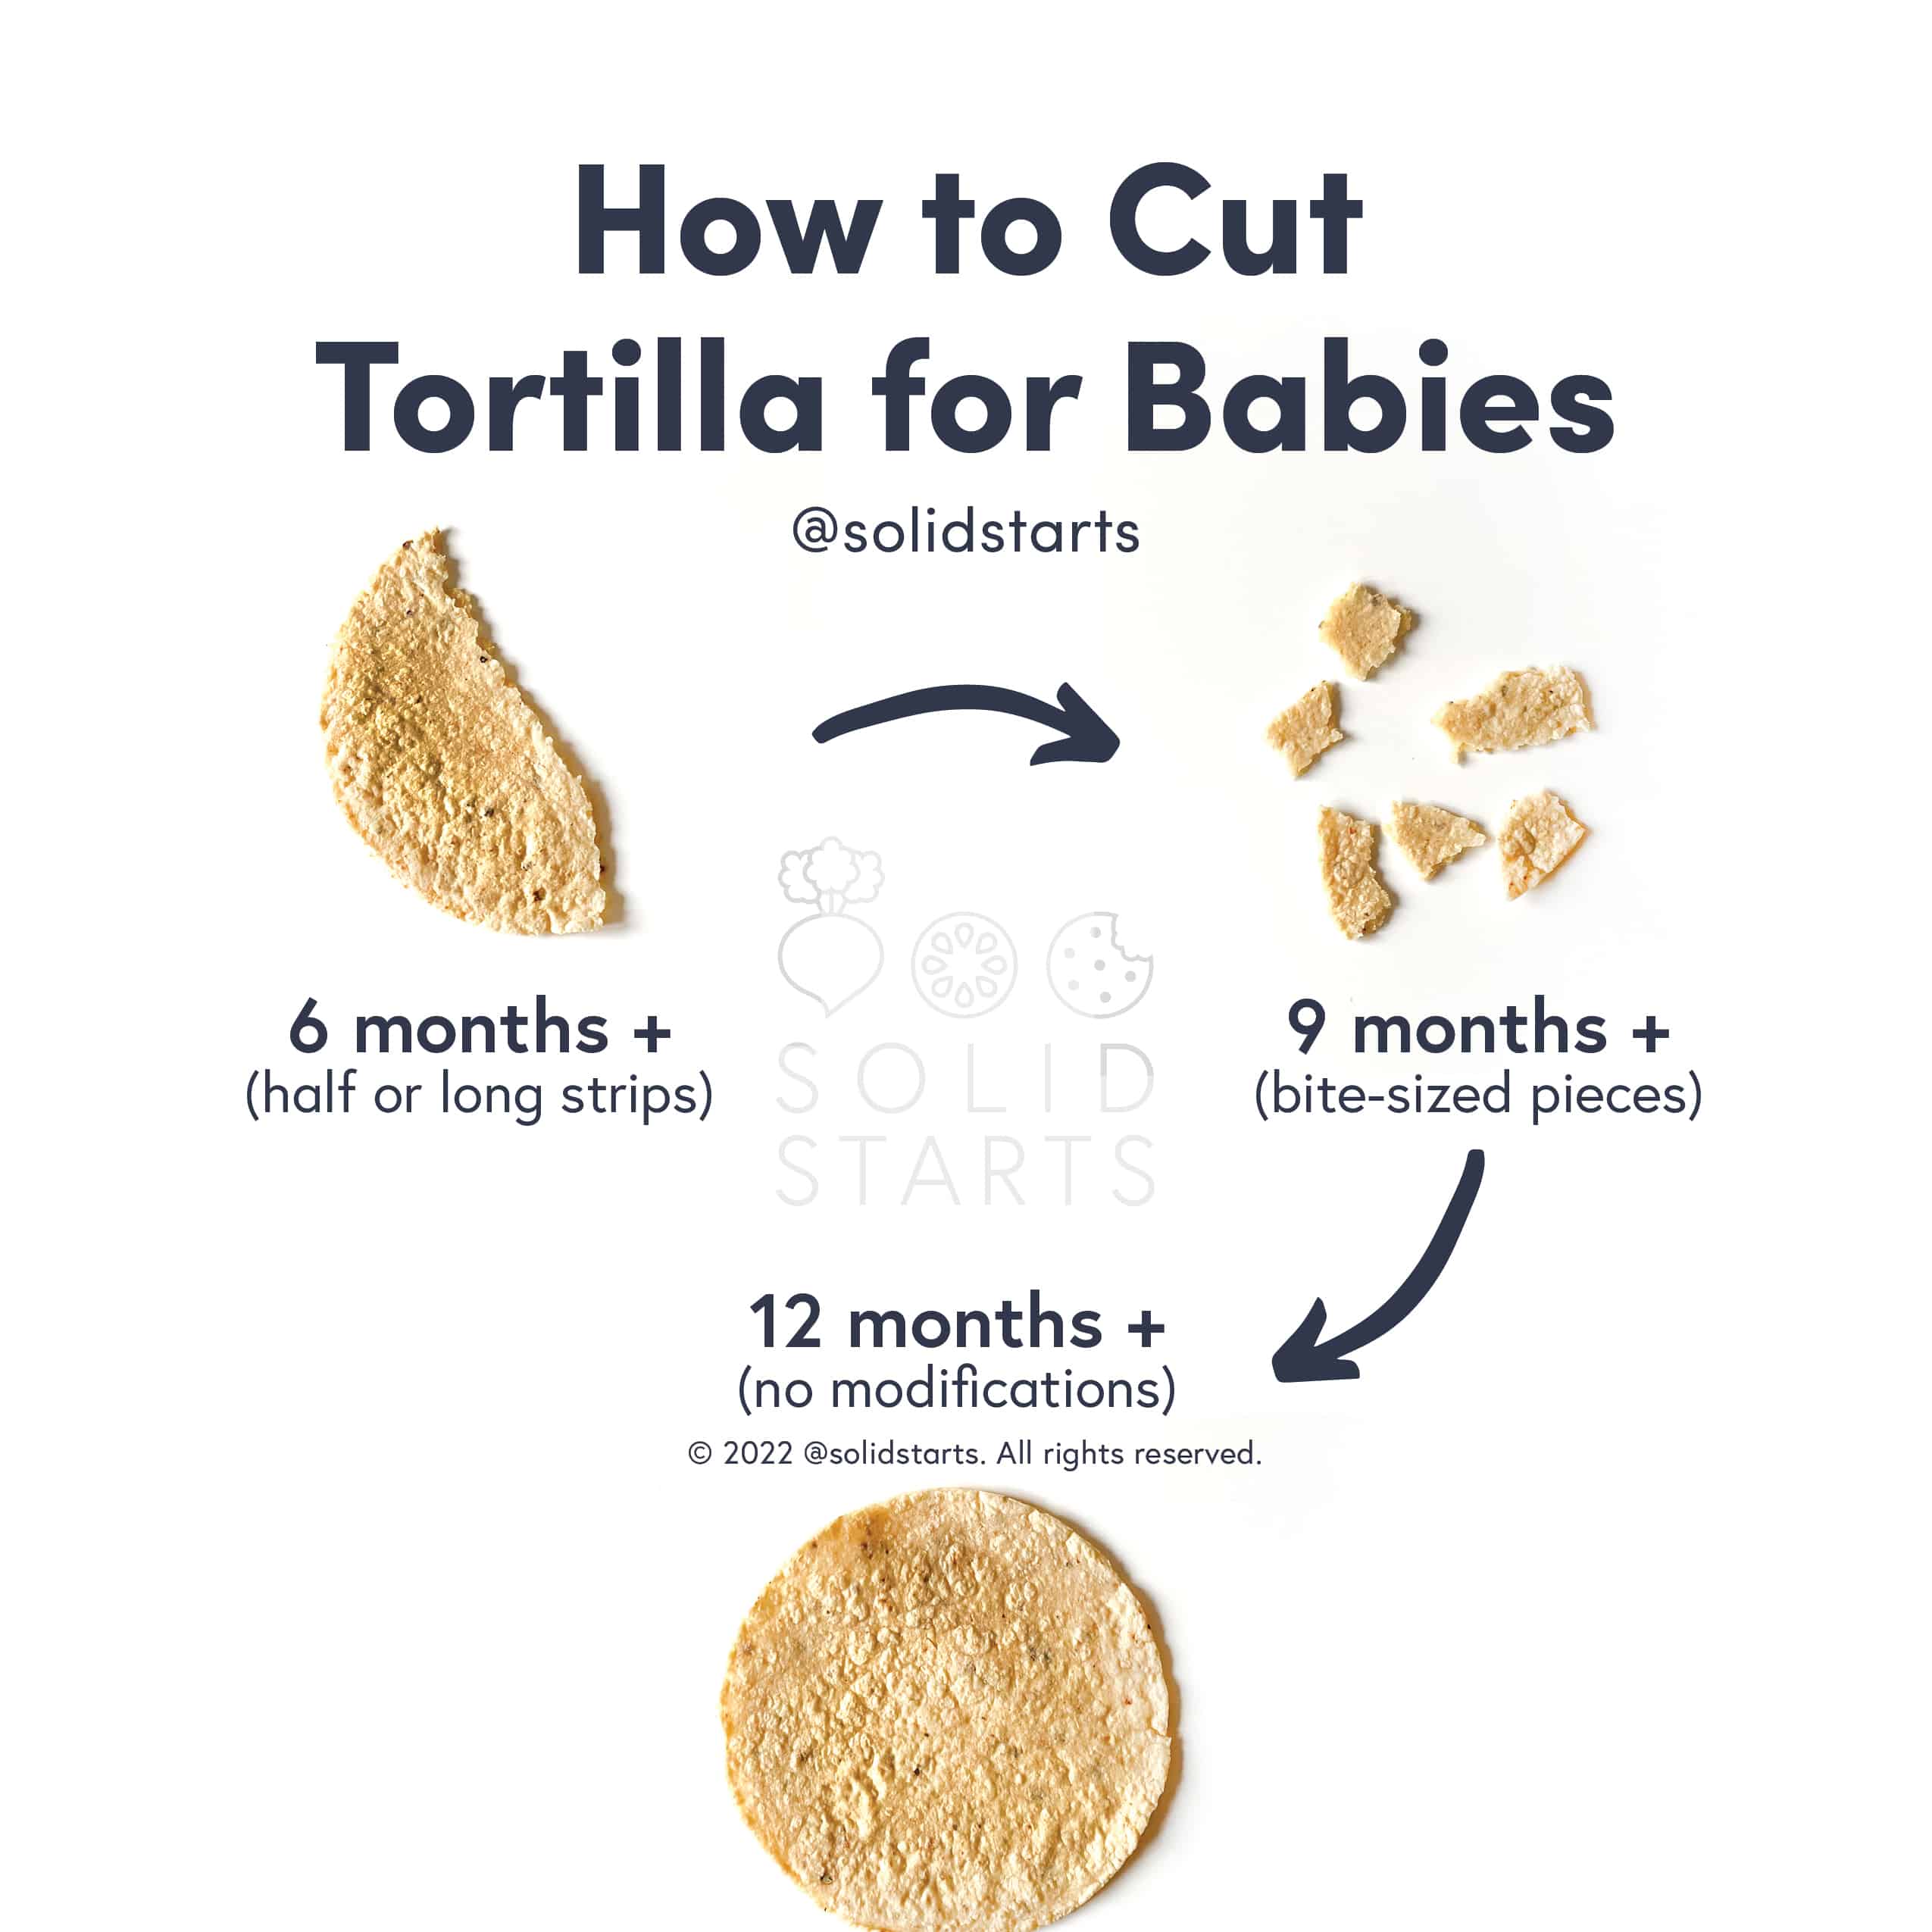 How to Cut Tortilla for Babies